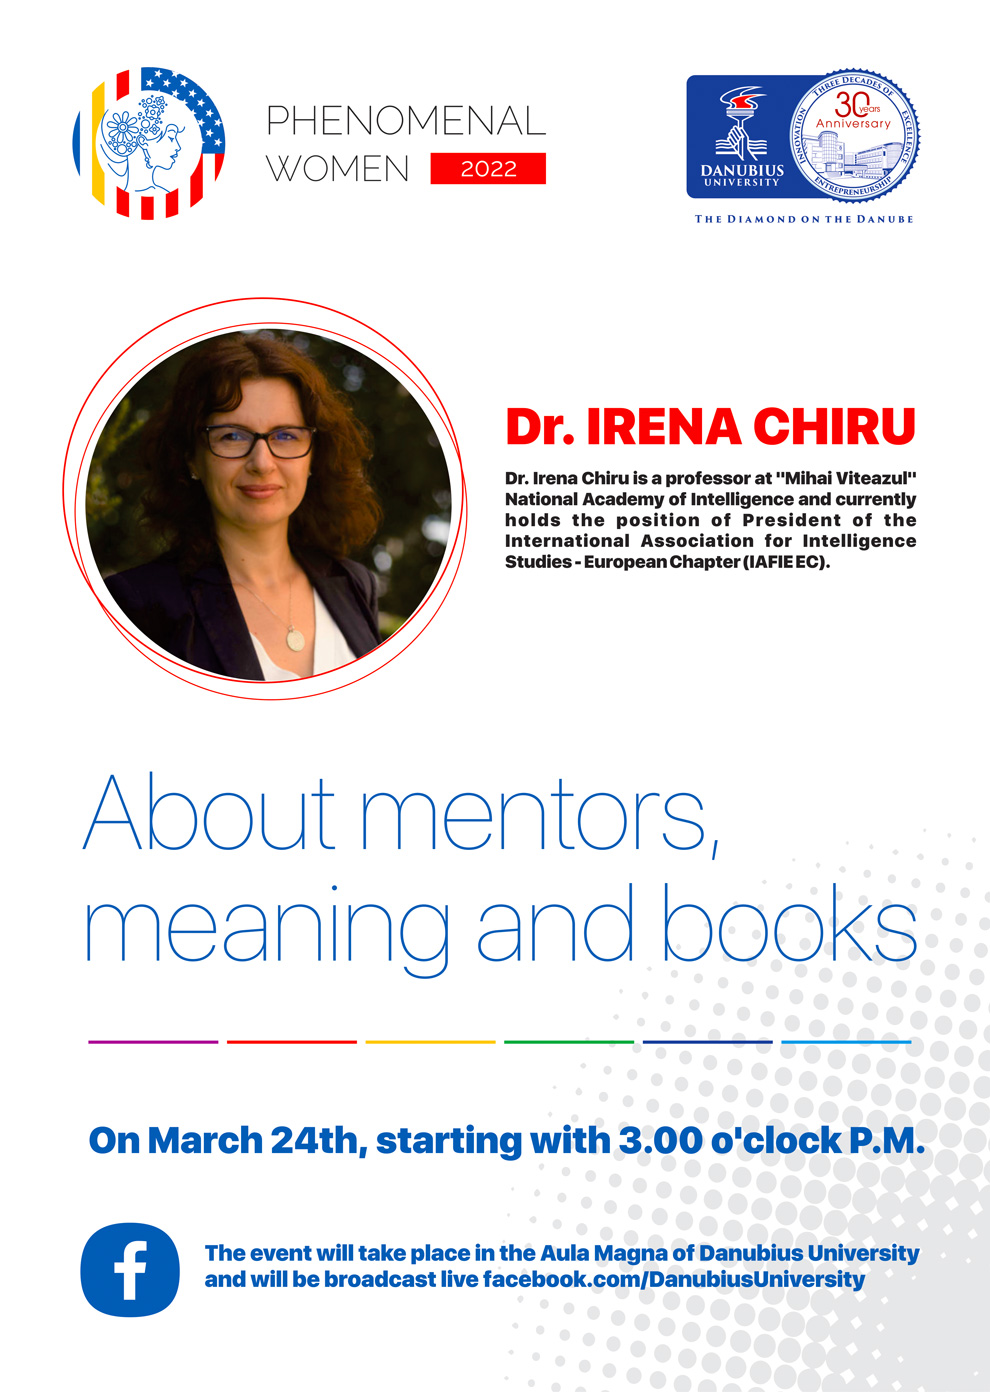 Dr. IRENA CHIRU, intelligence expert, tells us about mentors, meaning and books